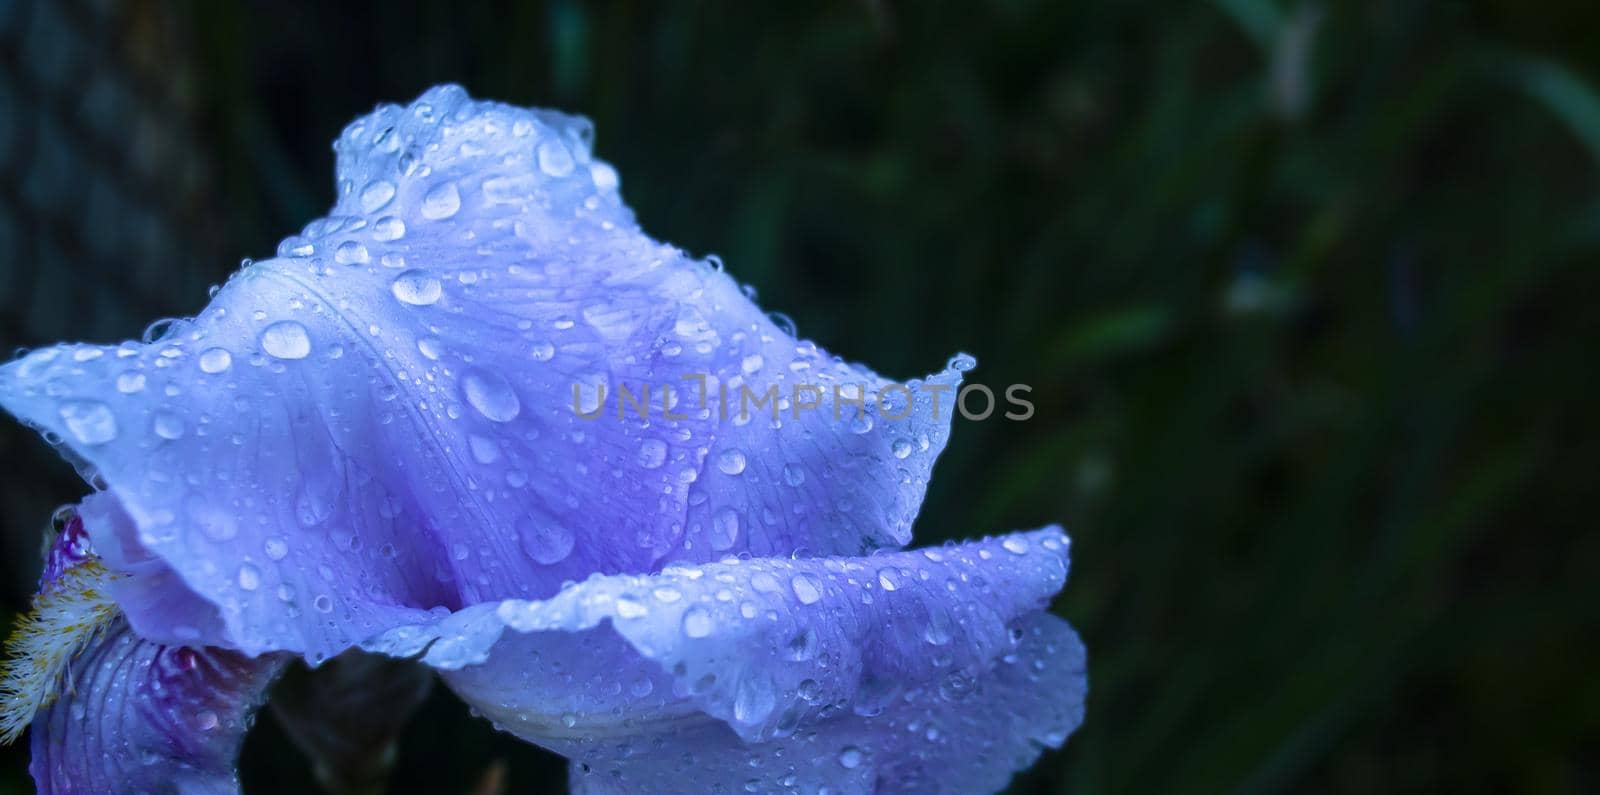 Flowering irises with drops of water after rain by mtx